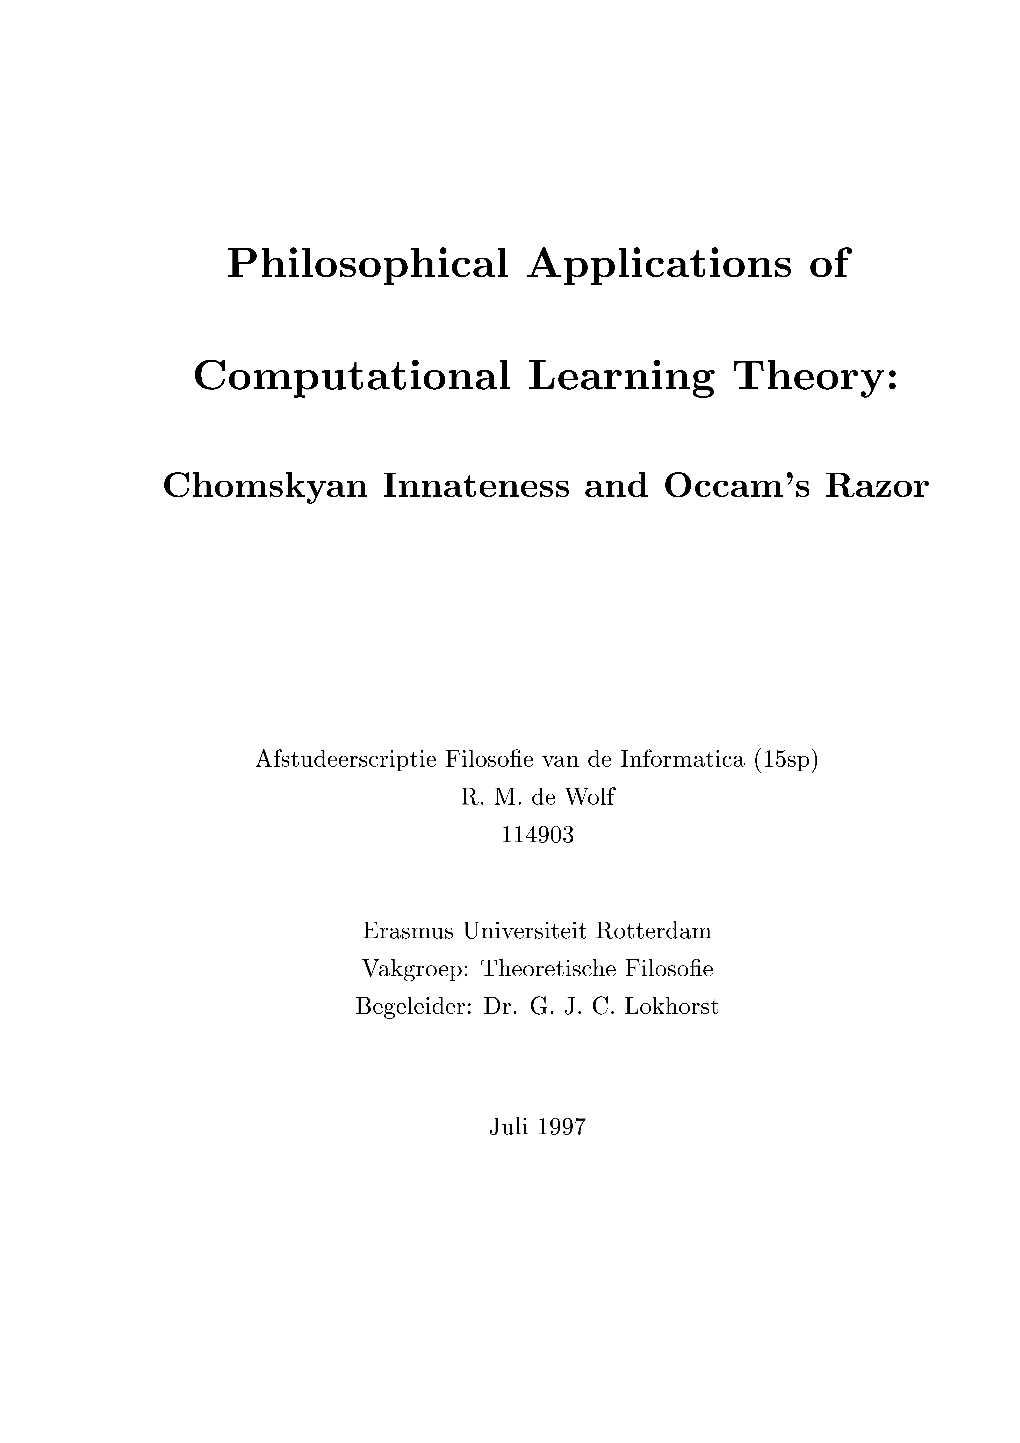 Philosophical Applications of Computational Learning Theory